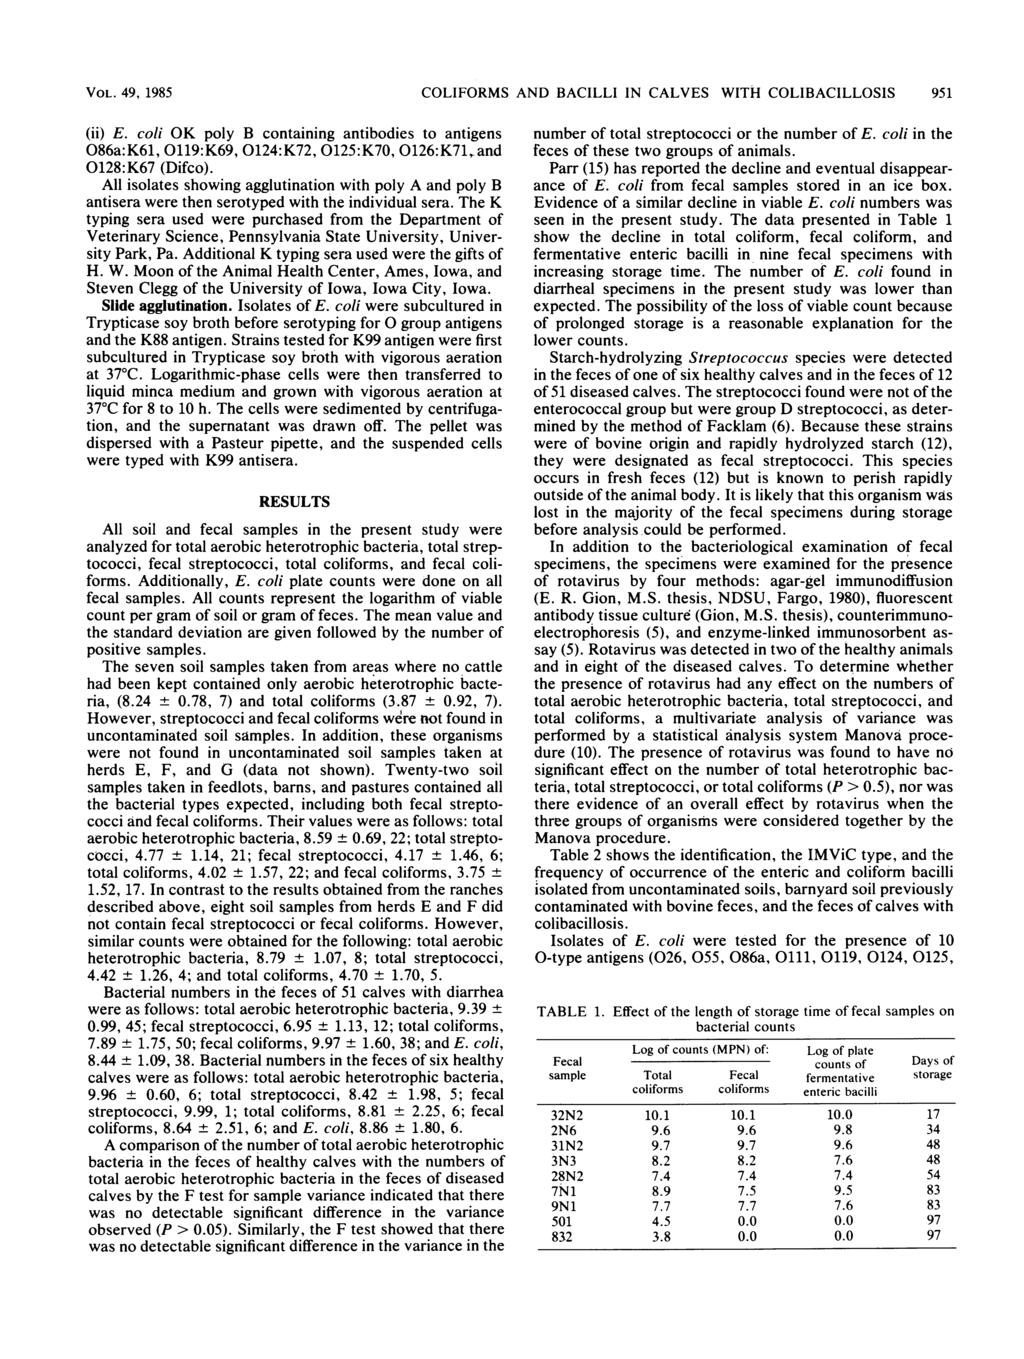 VOL. 49, 1985 COLIFORMS AND BACILLI IN CALVES WITH COLIBACILLOSIS 951 (ii) E. coli OK poly B containing antibodies to antigens 086a:K61, 0119:K69, 0124:K72, 0125:K70, 0126:K71, and 0128:K67 (Difco).